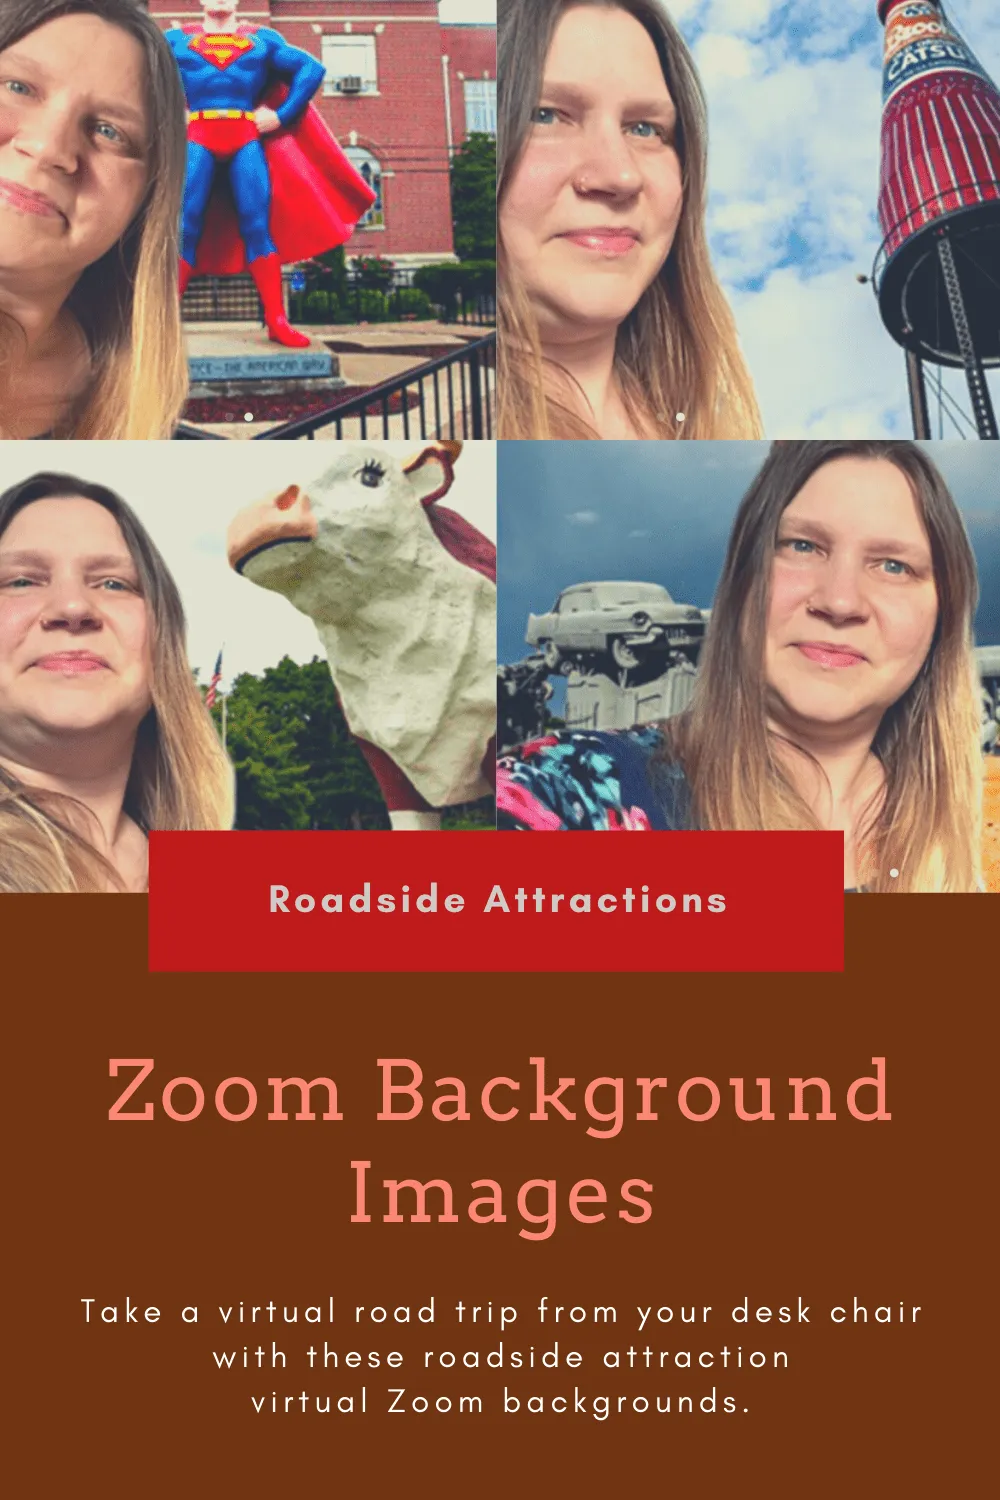 If you're a roadtripper who wishes you were behind the wheel instead of working from home, try these Zoom background images of roadside attractions as a virtual teleconference backdrop while you work from home. #WorkFromHome #Zoom #ZoomBackgrounds #ZoomBackdrops #RoadsideAttraction #RoadsideAttractions #WeirdRoadsideAttractions #VintageRoadsideAttractions #RoadTripStops #WorldsLargestRoadsideAttractions #RoadTrip #USARoadsideAttractions #AmericanRoadsideAttractions #USA #America